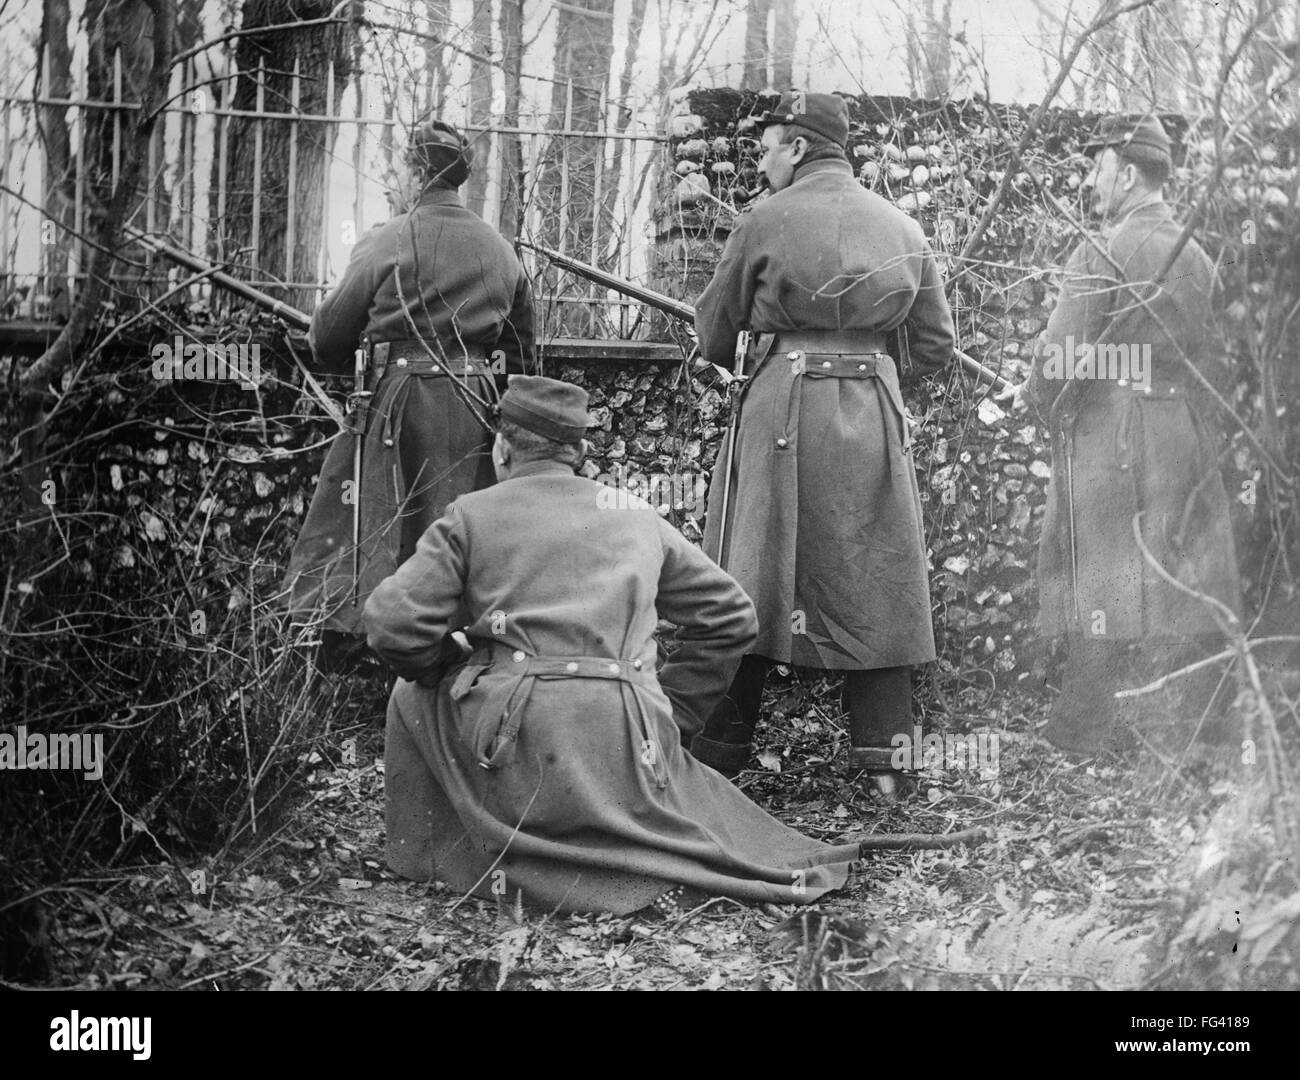 WWI: SOLDIERS, c1914. /nFrench soldiers guarding a chateau in France. Photograph, c1914. Stock Photo